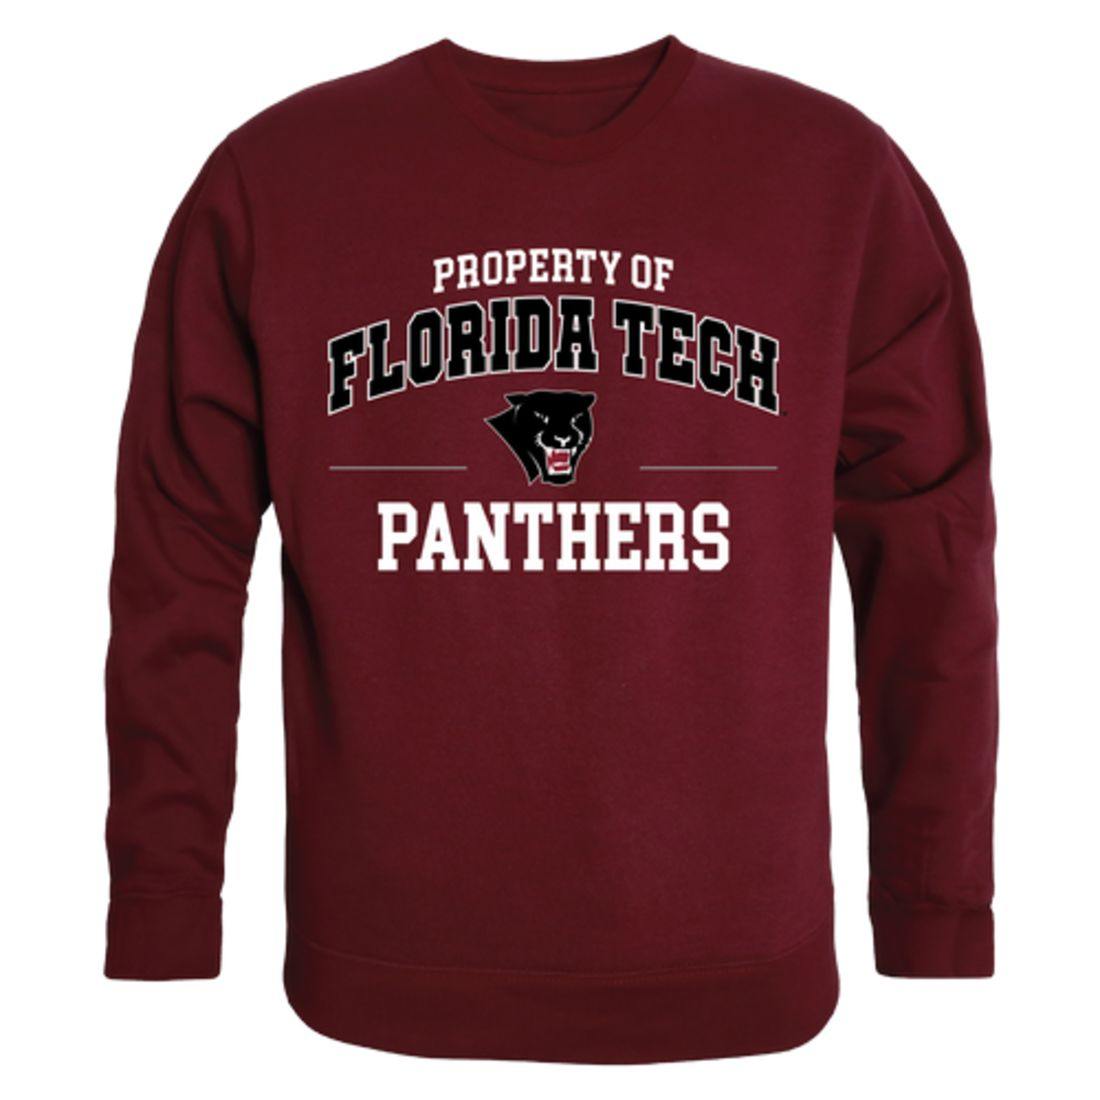 FIorida Institute of Technology Panthers Property Crewneck Pullover Sweatshirt Sweater Maroon-Campus-Wardrobe